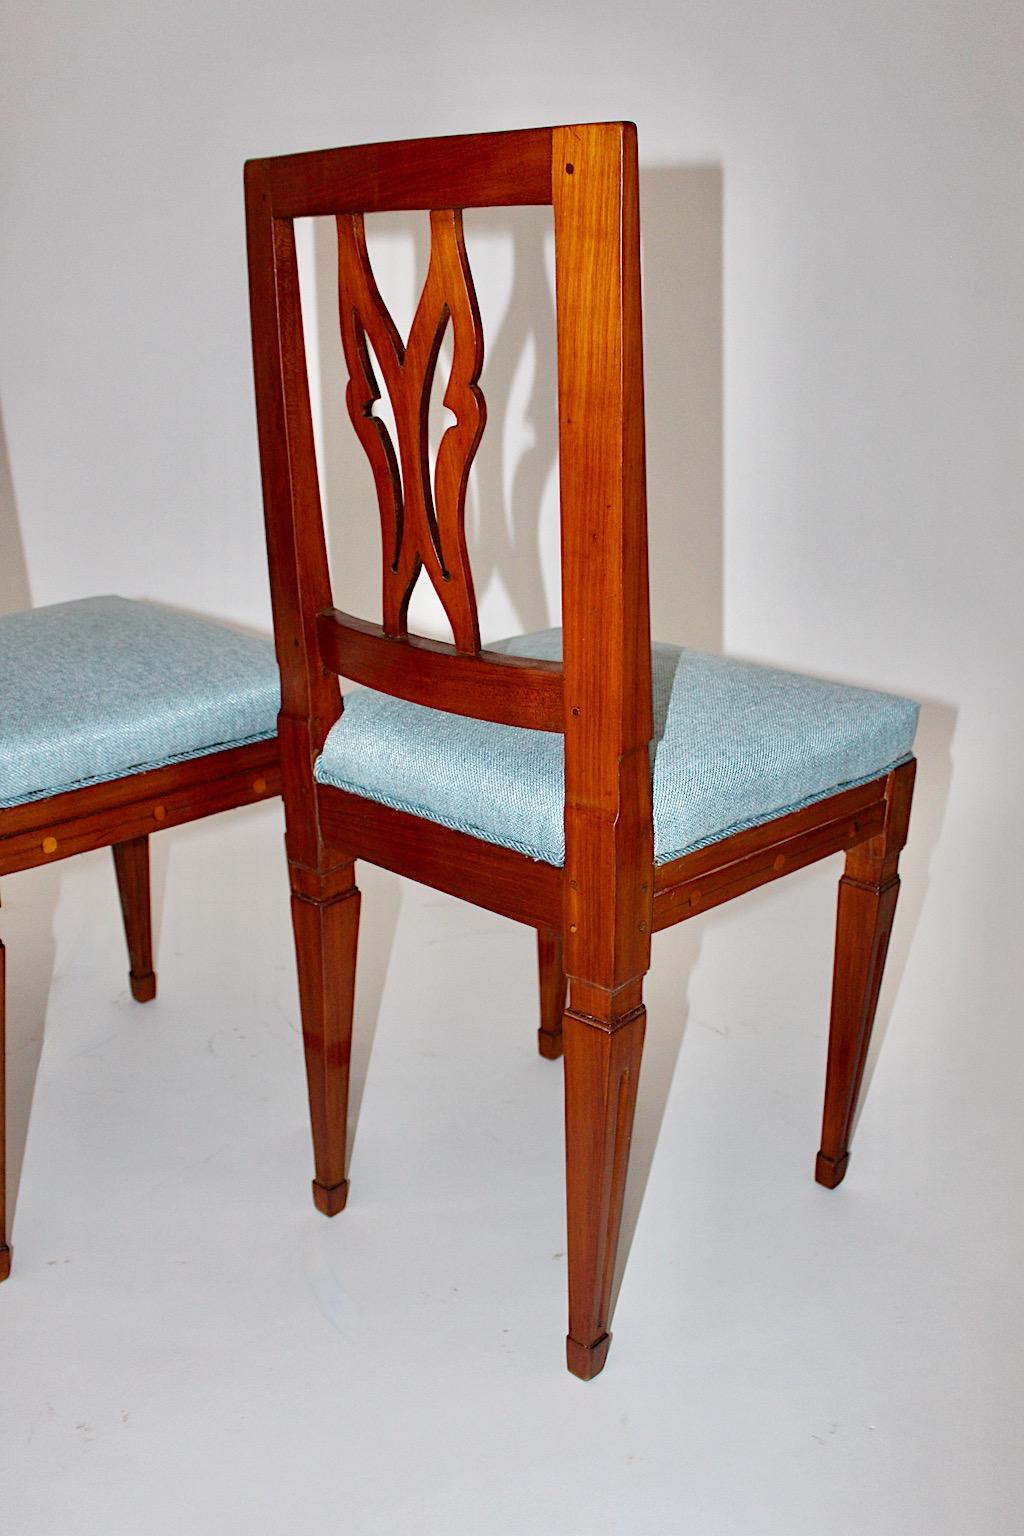 Cherrywood Maple Blue Upholstery Dining Chairs Set of Four circa 1780 Austria 6